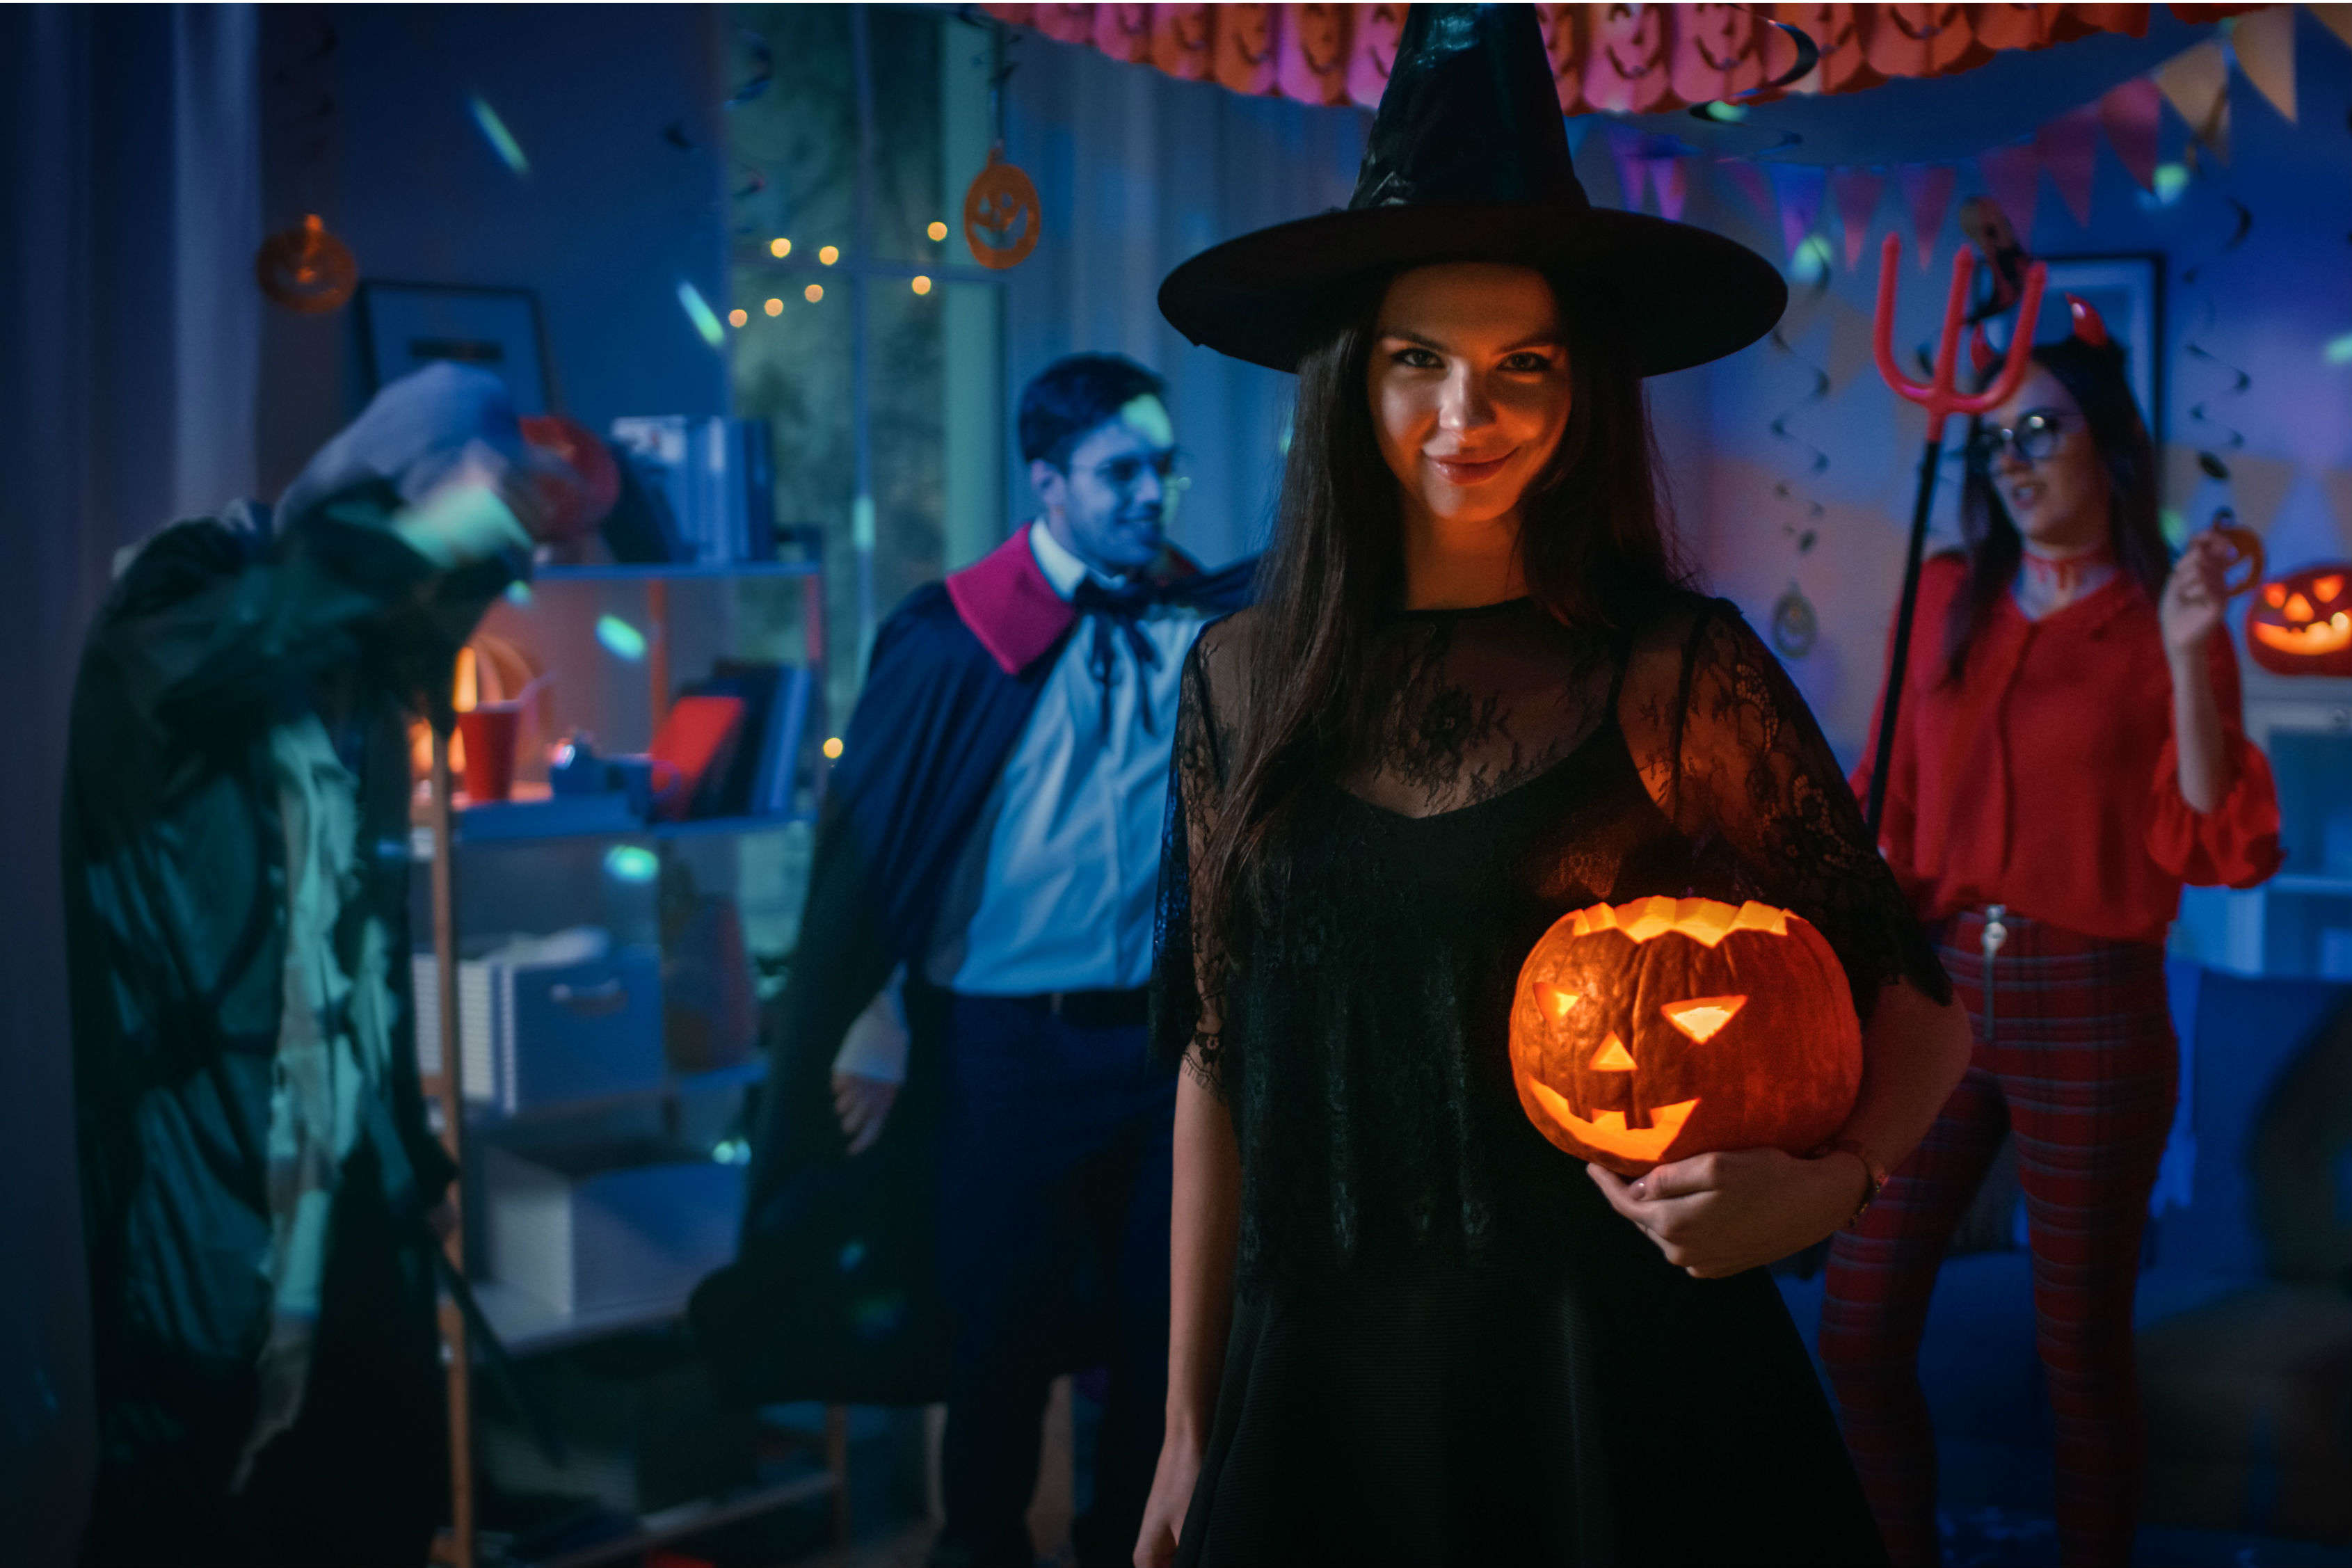 Halloween in Los Angeles—courting darkness in the city of angels